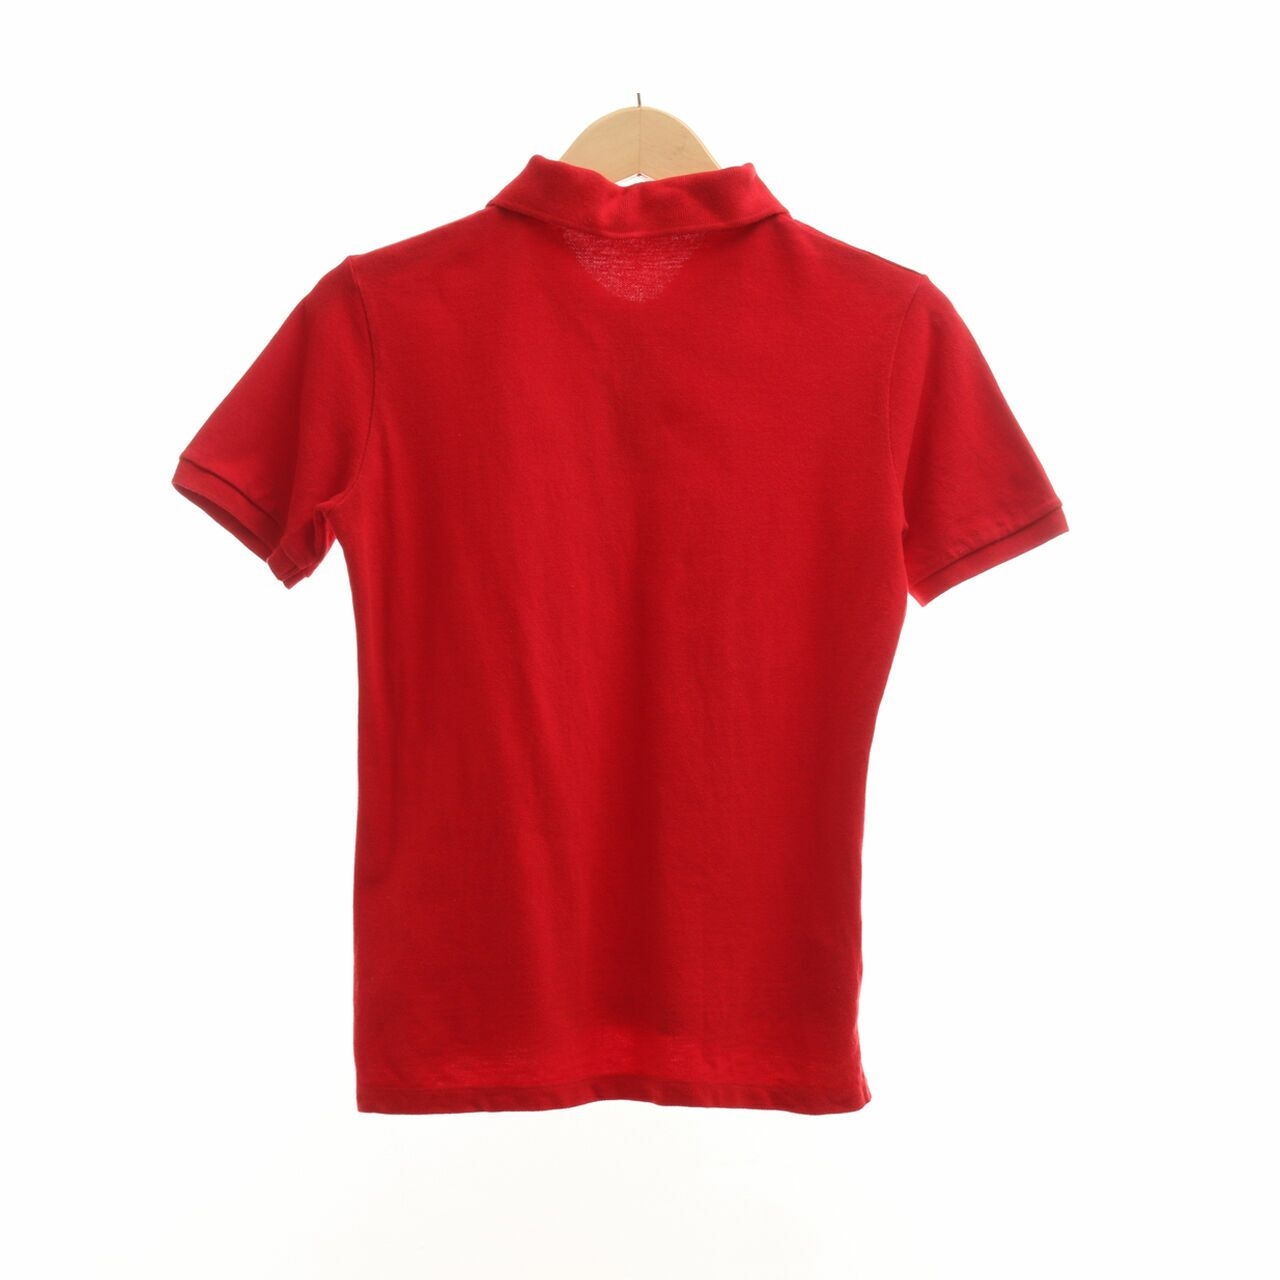 Hush Puppies Red Polo T-Shirt